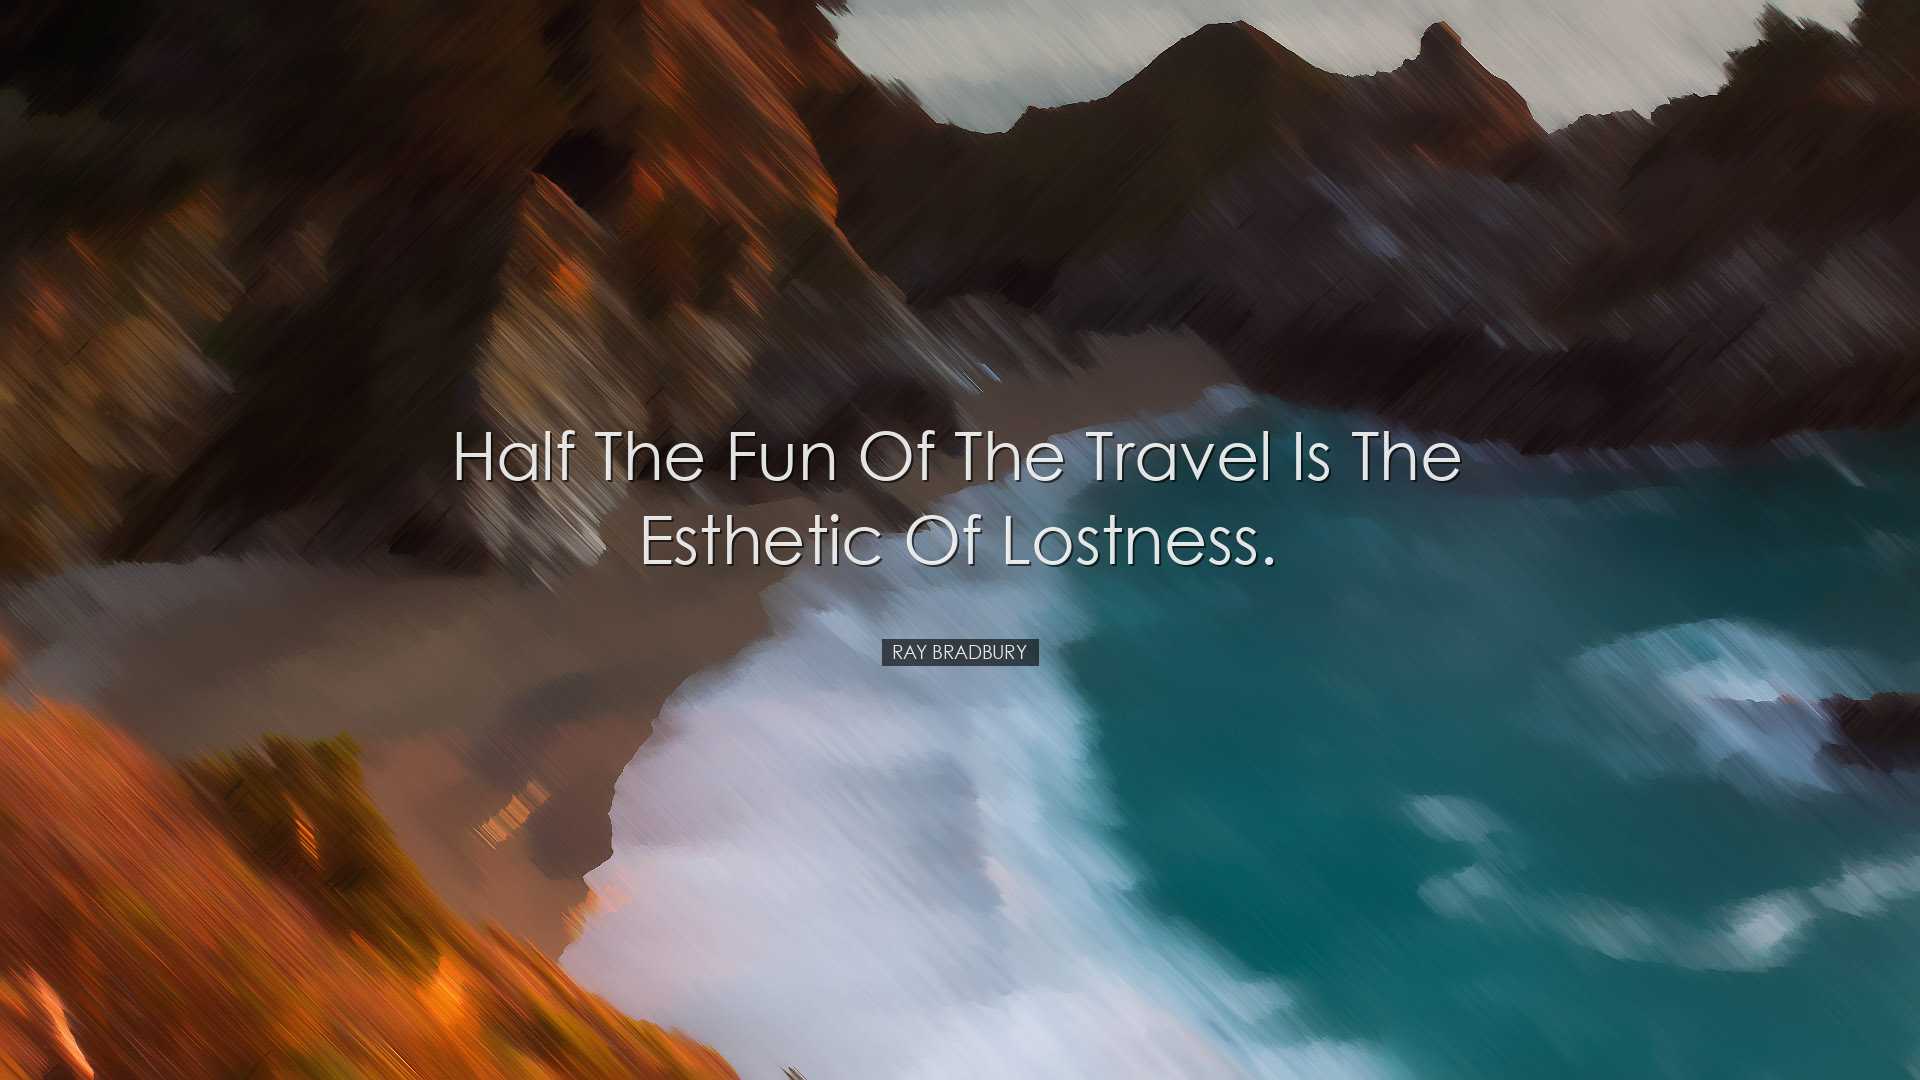 Half the fun of the travel is the esthetic of lostness. - Ray Brad